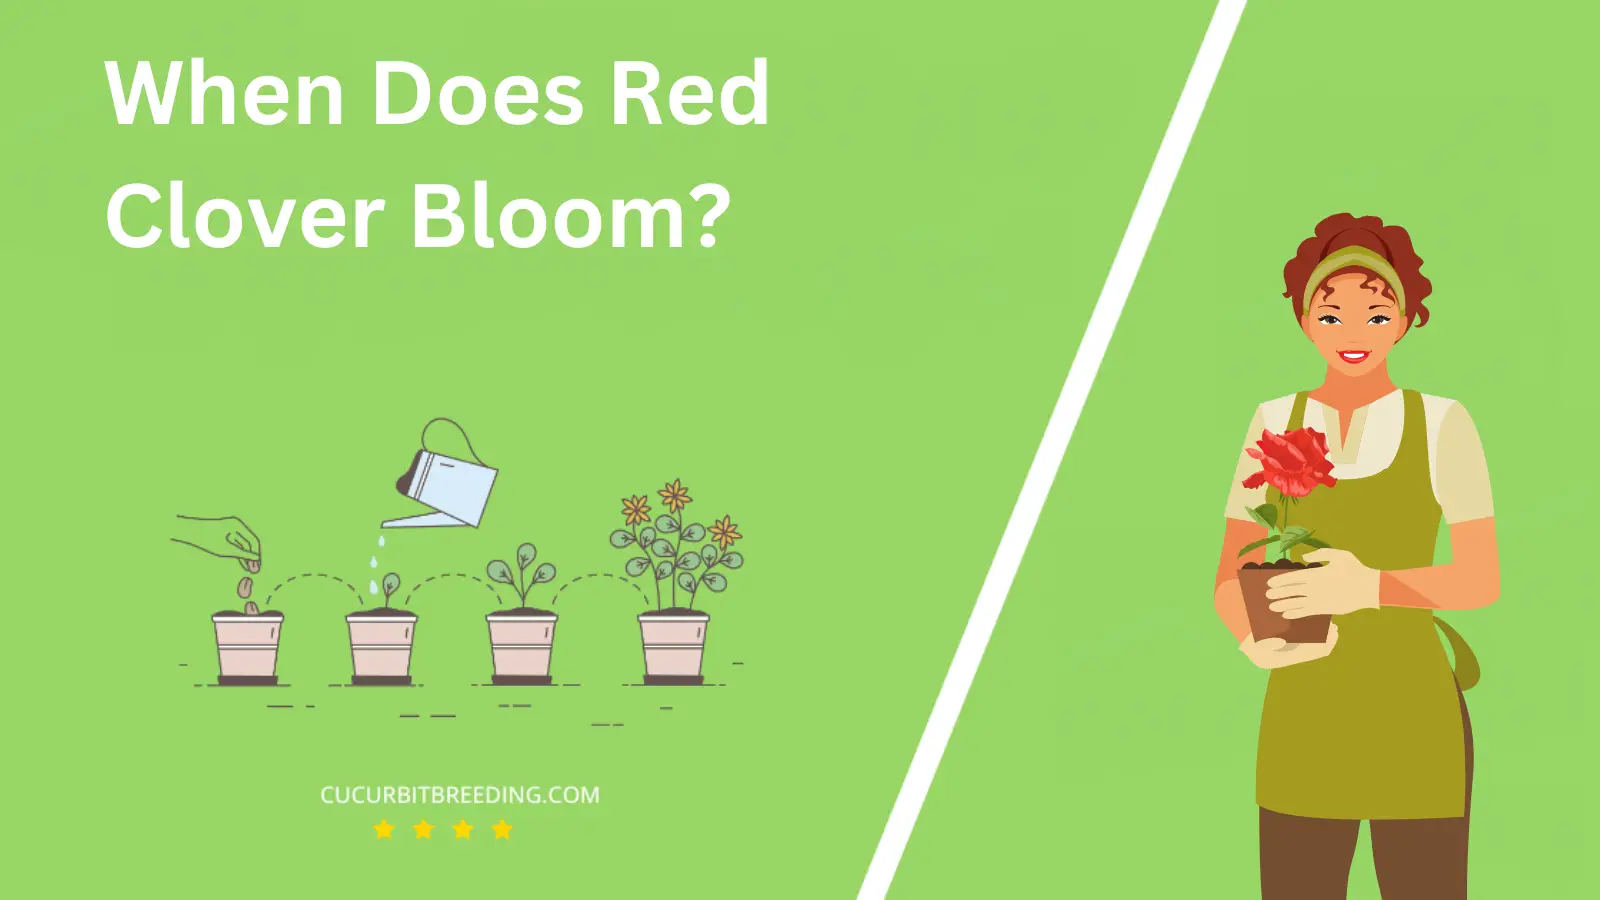 When Does Red Clover Bloom?